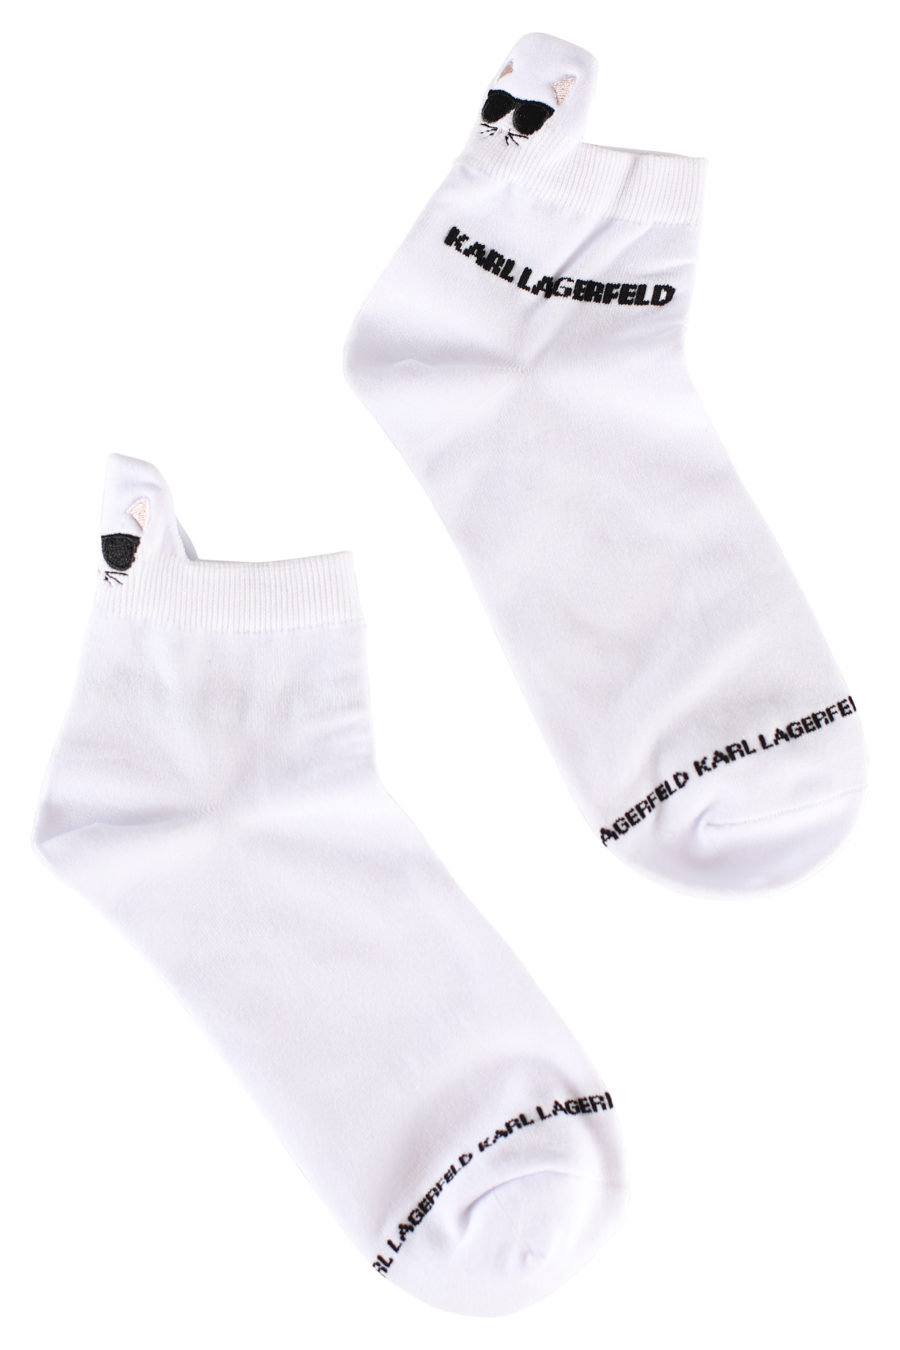 Pack of 2 embroidered socks - IMG 1873